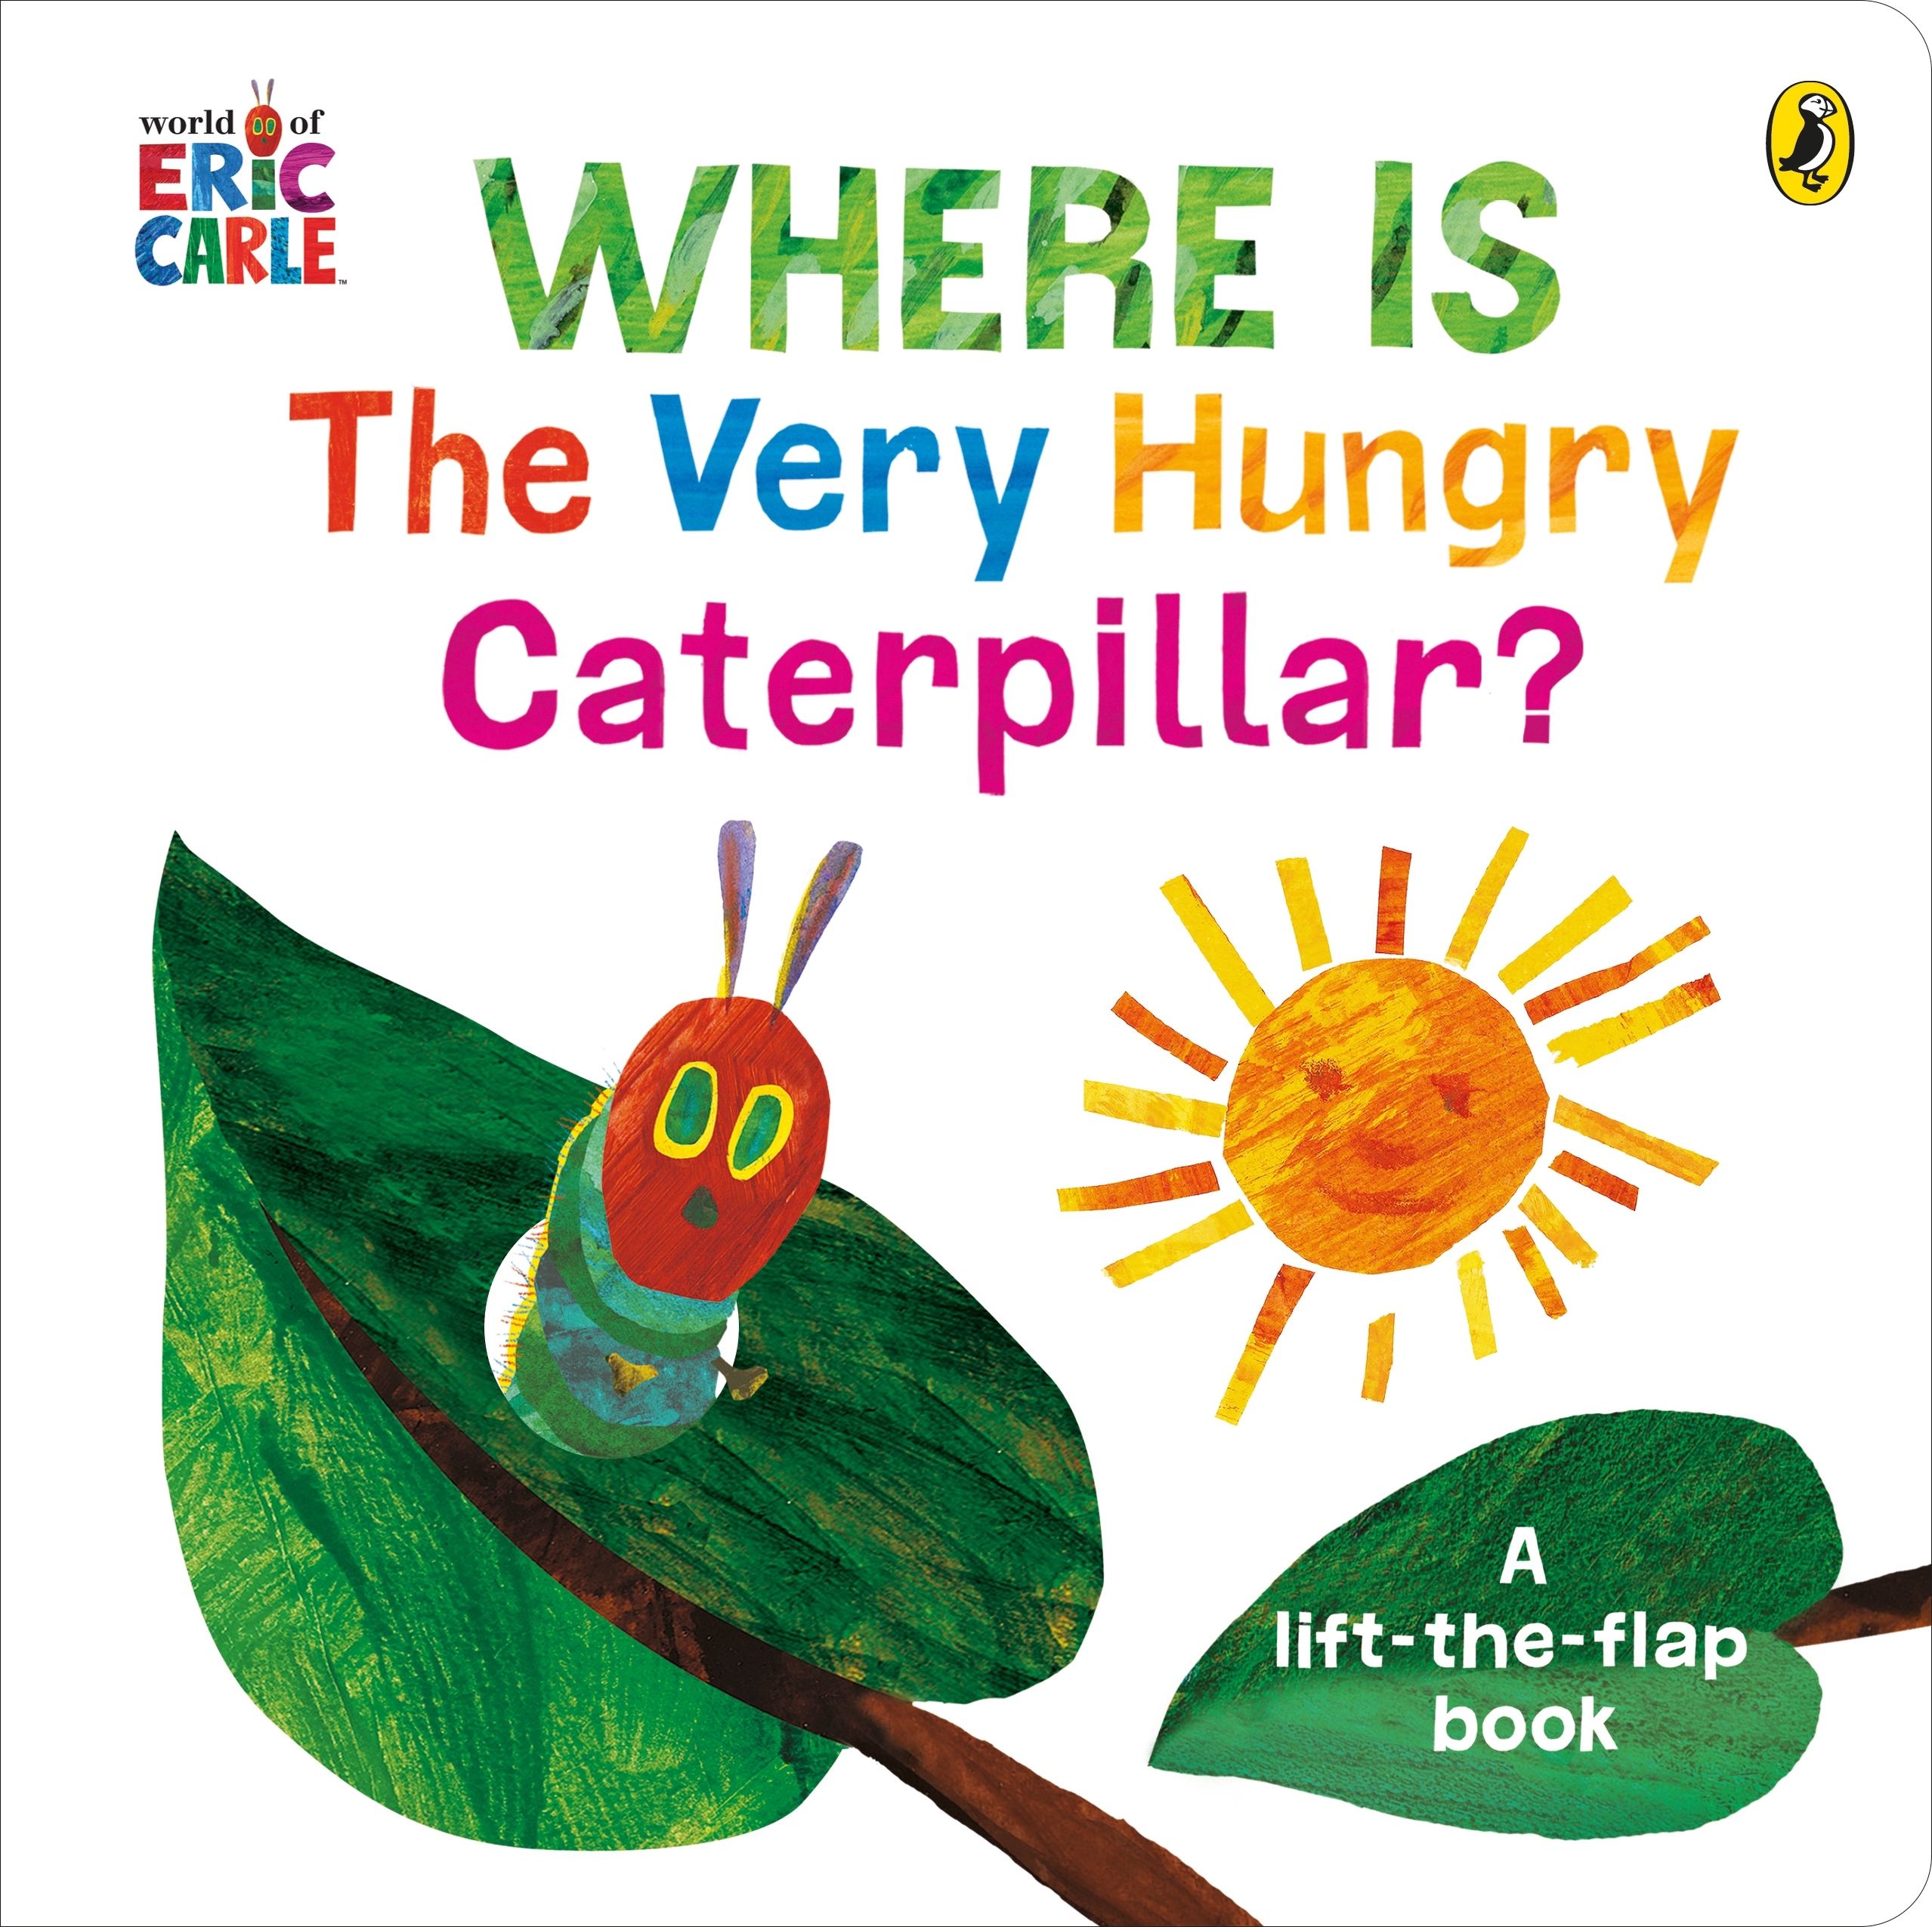 Where Is The Very Hungry Caterpillar? by Eric Carle - Penguin Books Australia